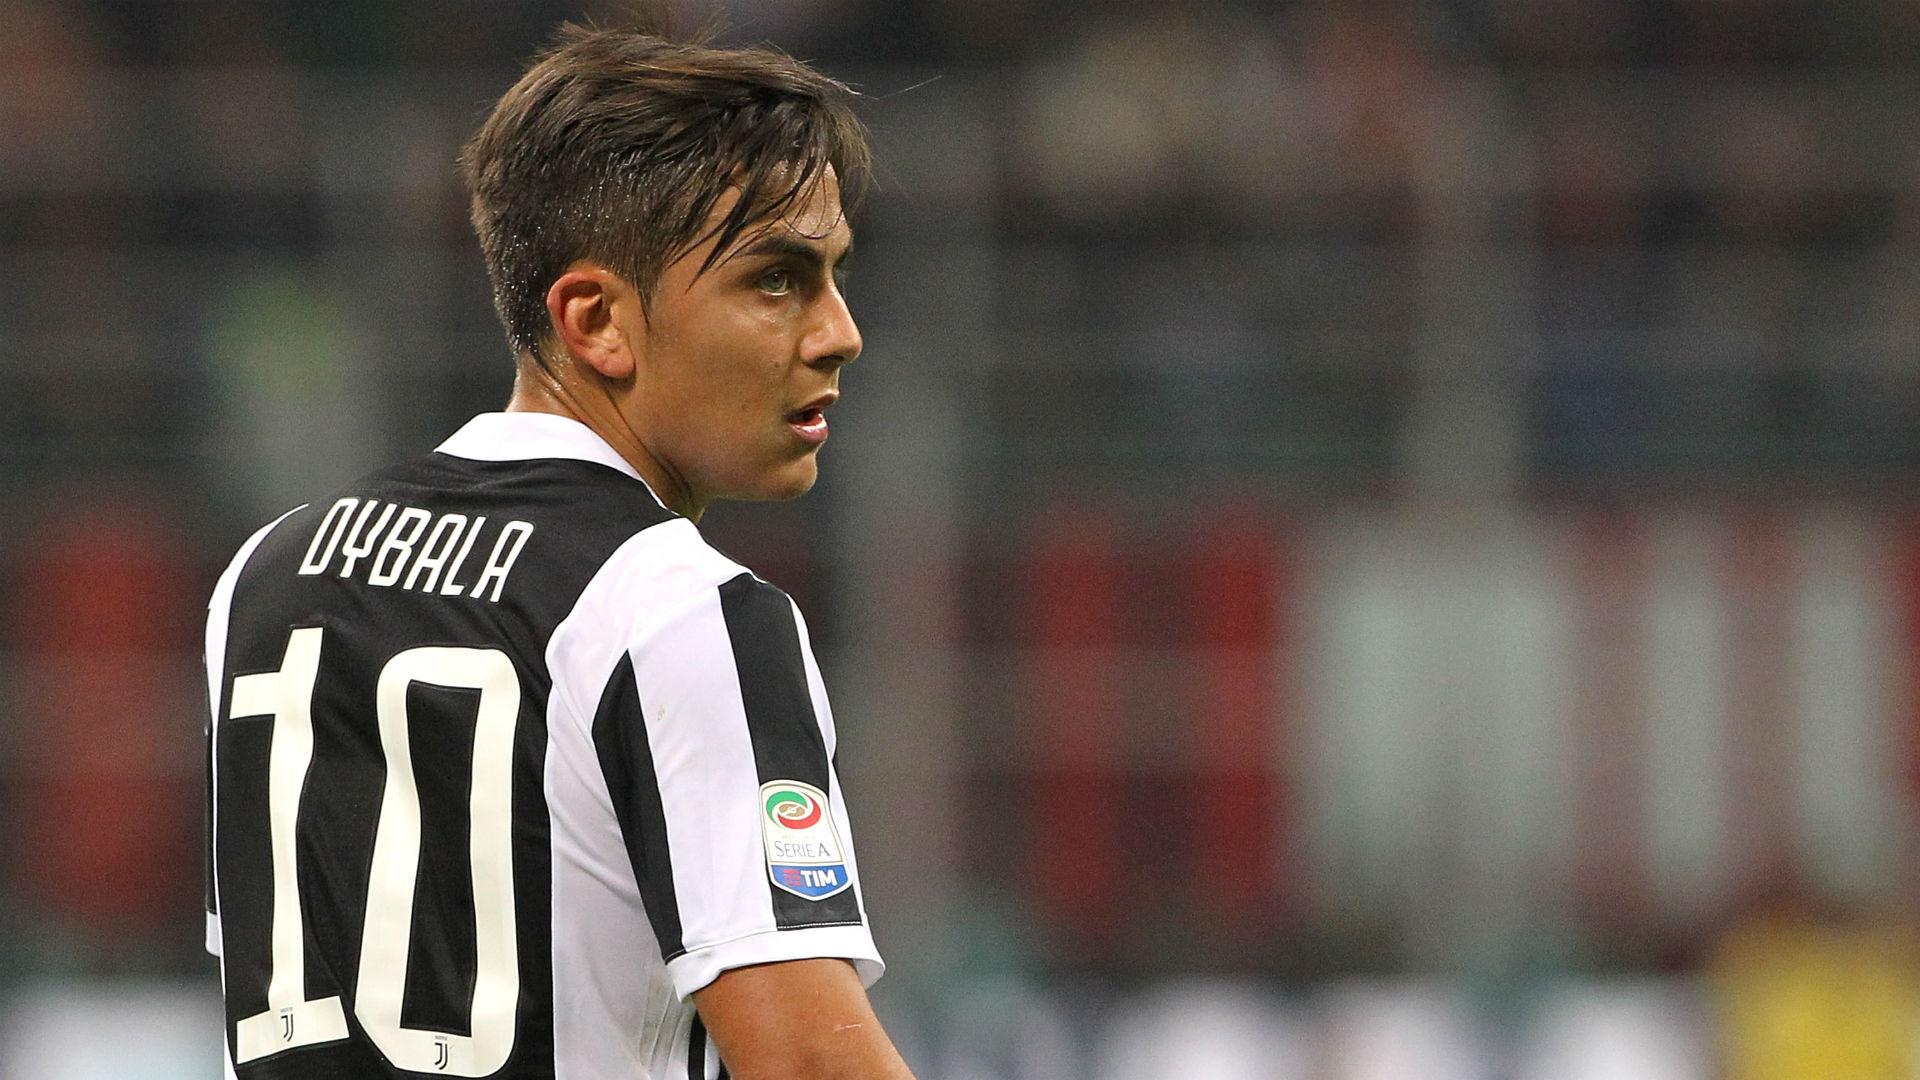 Alex Sandro and Dybala will recover their best form, predicts